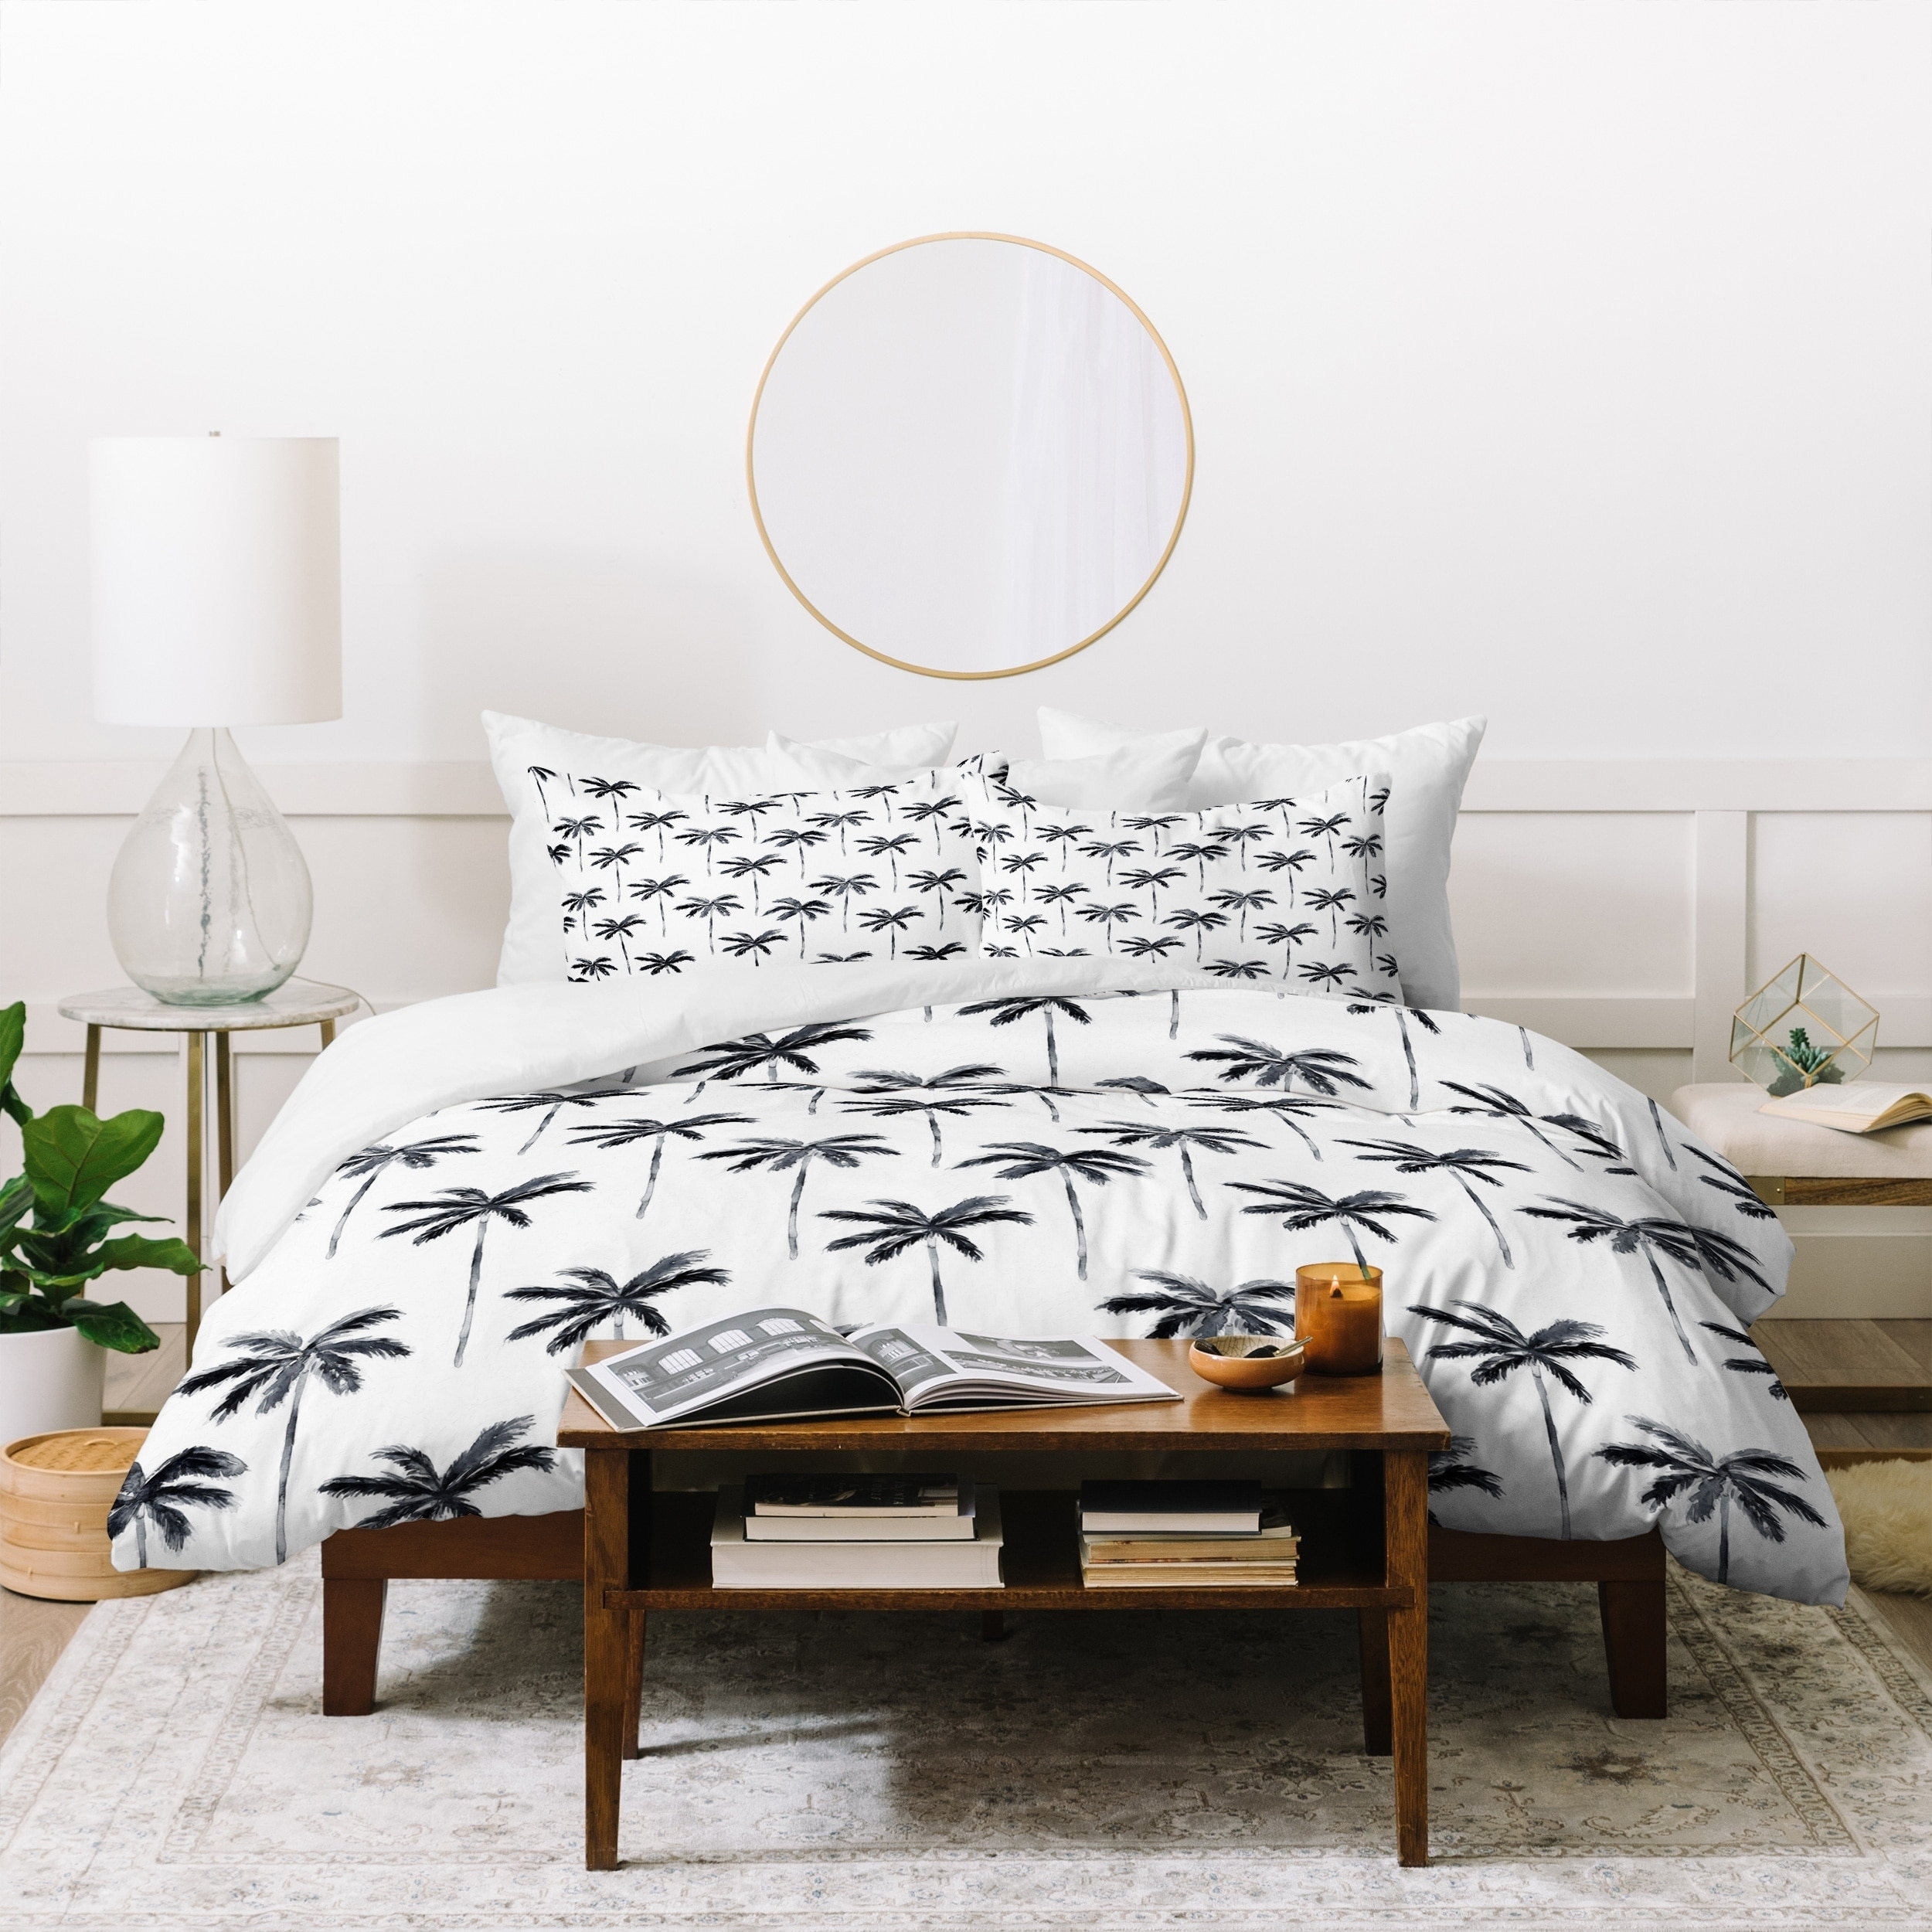 Floral Duvet Covers and Sets - Bed Bath & Beyond